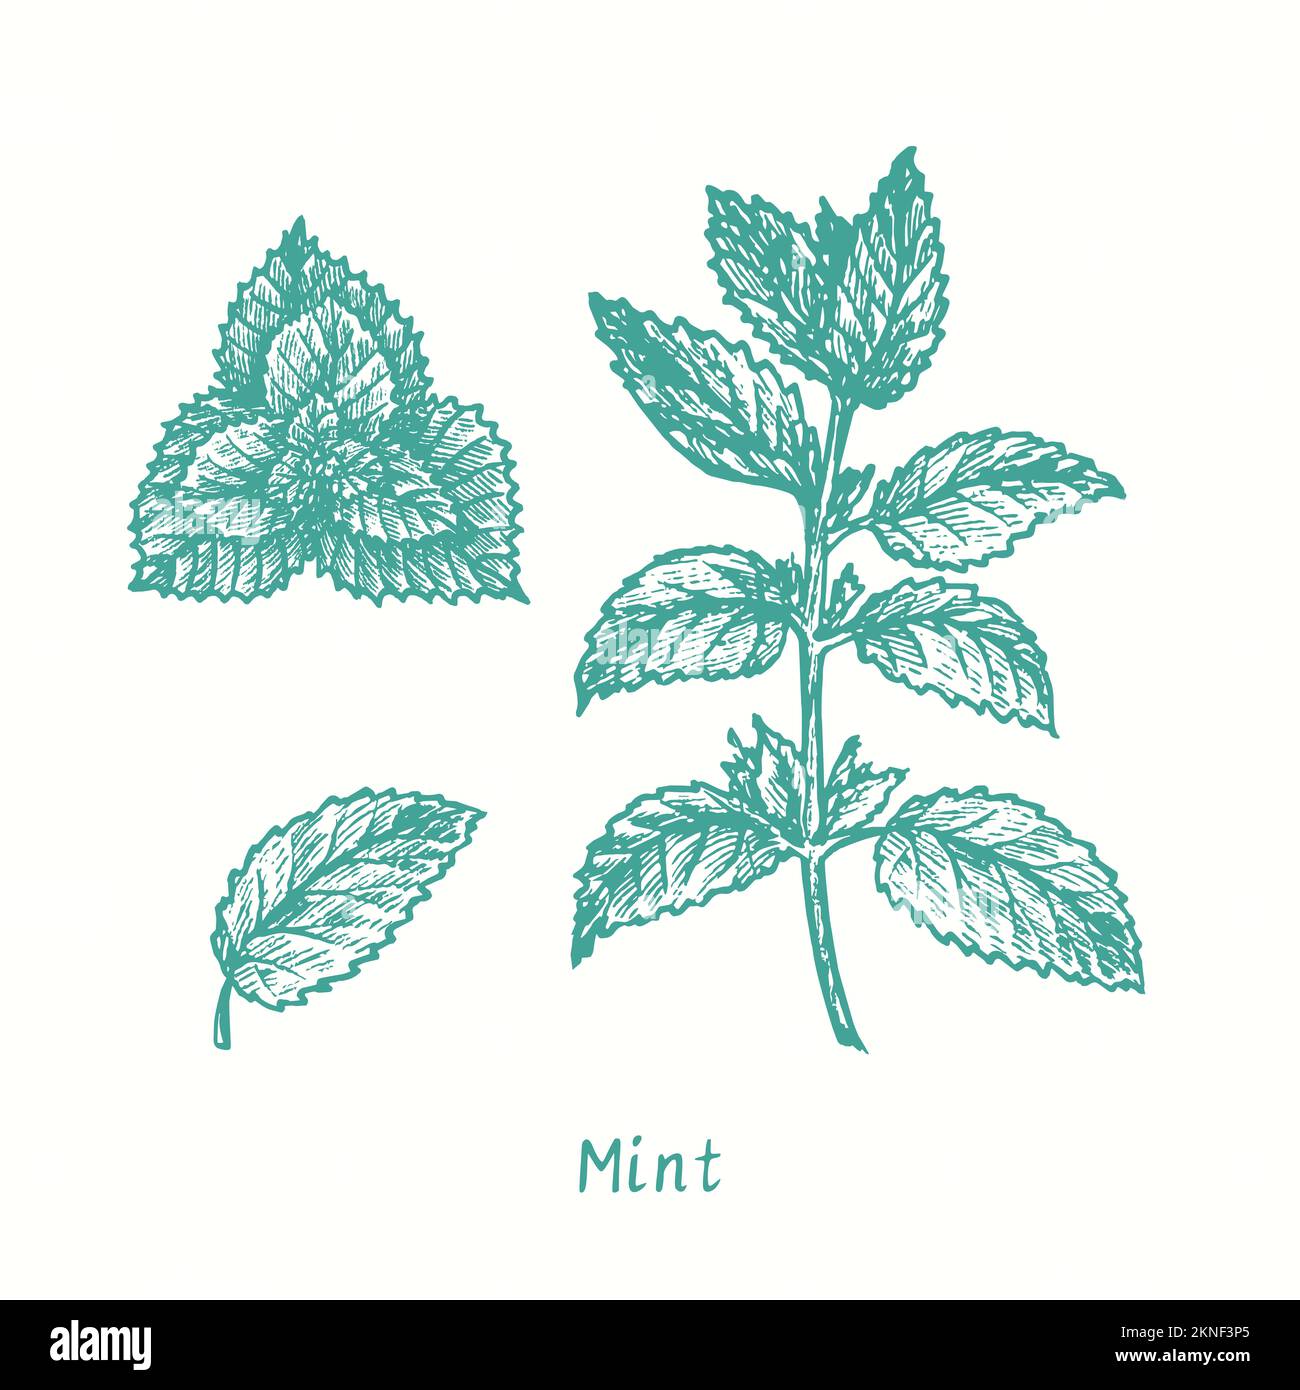 Mint twig with leaves.  Ink black and white doodle drawing in woodcut style Stock Photo